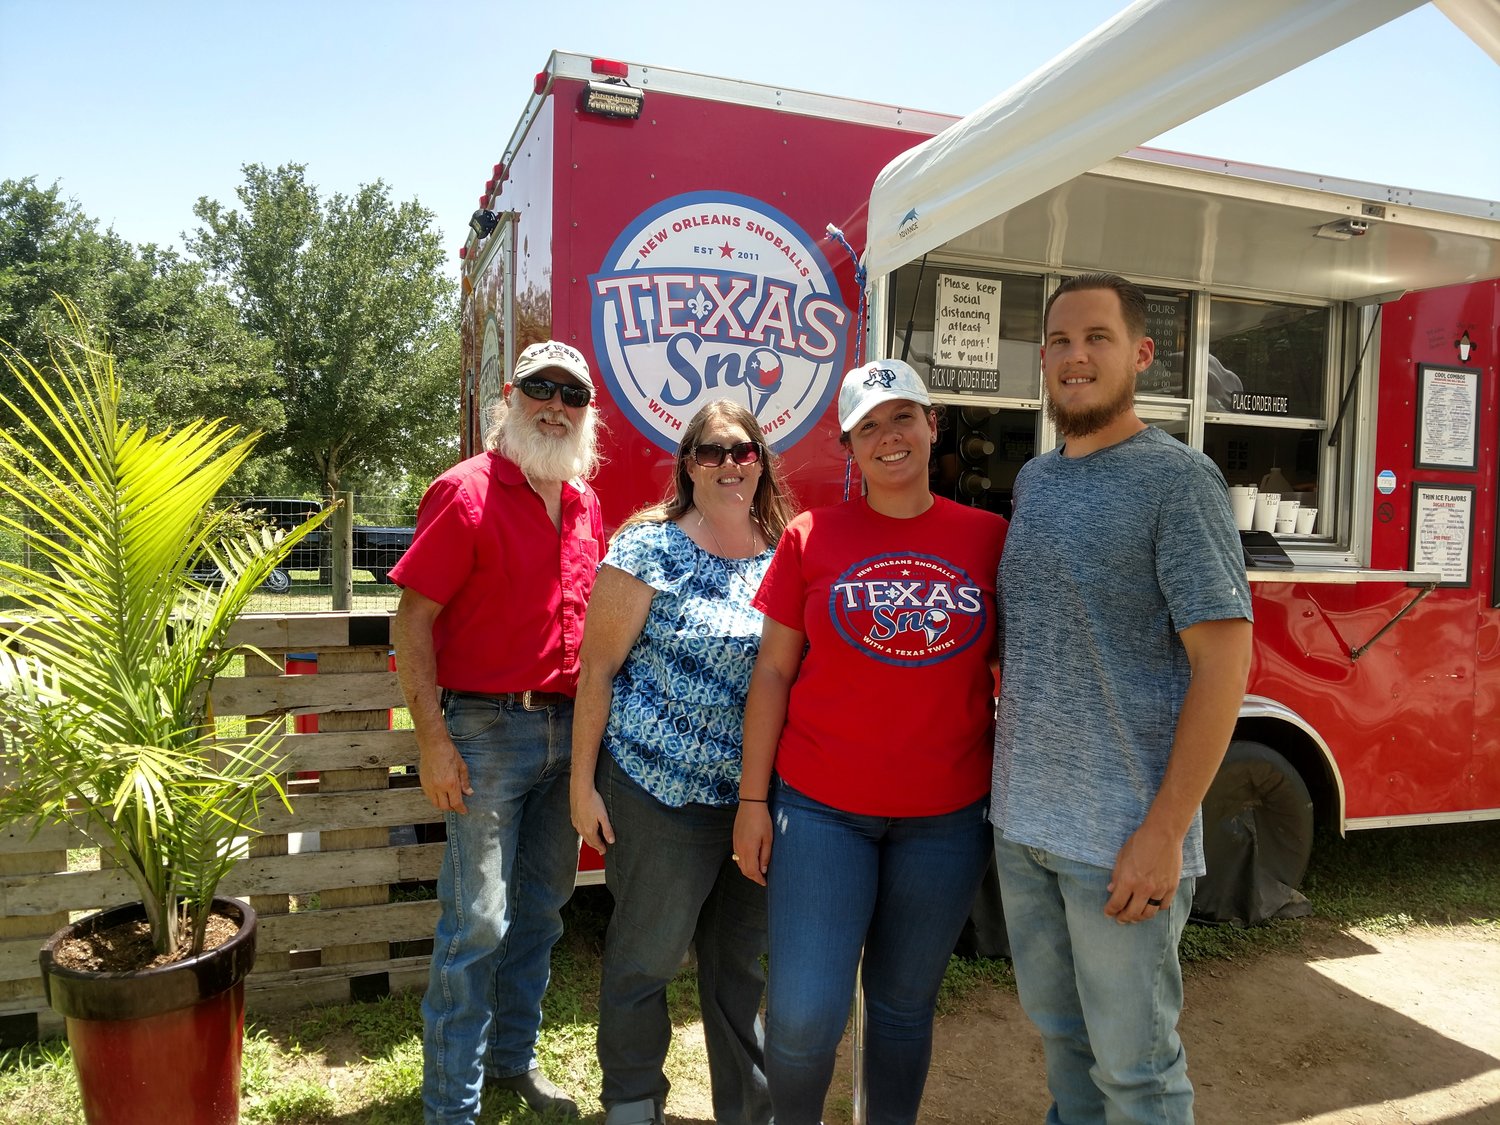 Texas Sno is a family-owned business that offers a variety of flavors in their sno cones, including some dye-free flavors. The dessert food trailer offers treats from its location at ErmaRose Winery. Pictured from left to right are owners Giles Debenport, Kristen Debenport, Kelsie Dartayet and Travis Debenport. Texas Sno can be reached at 346-377-9436 or visit them online at www.texassno.com.